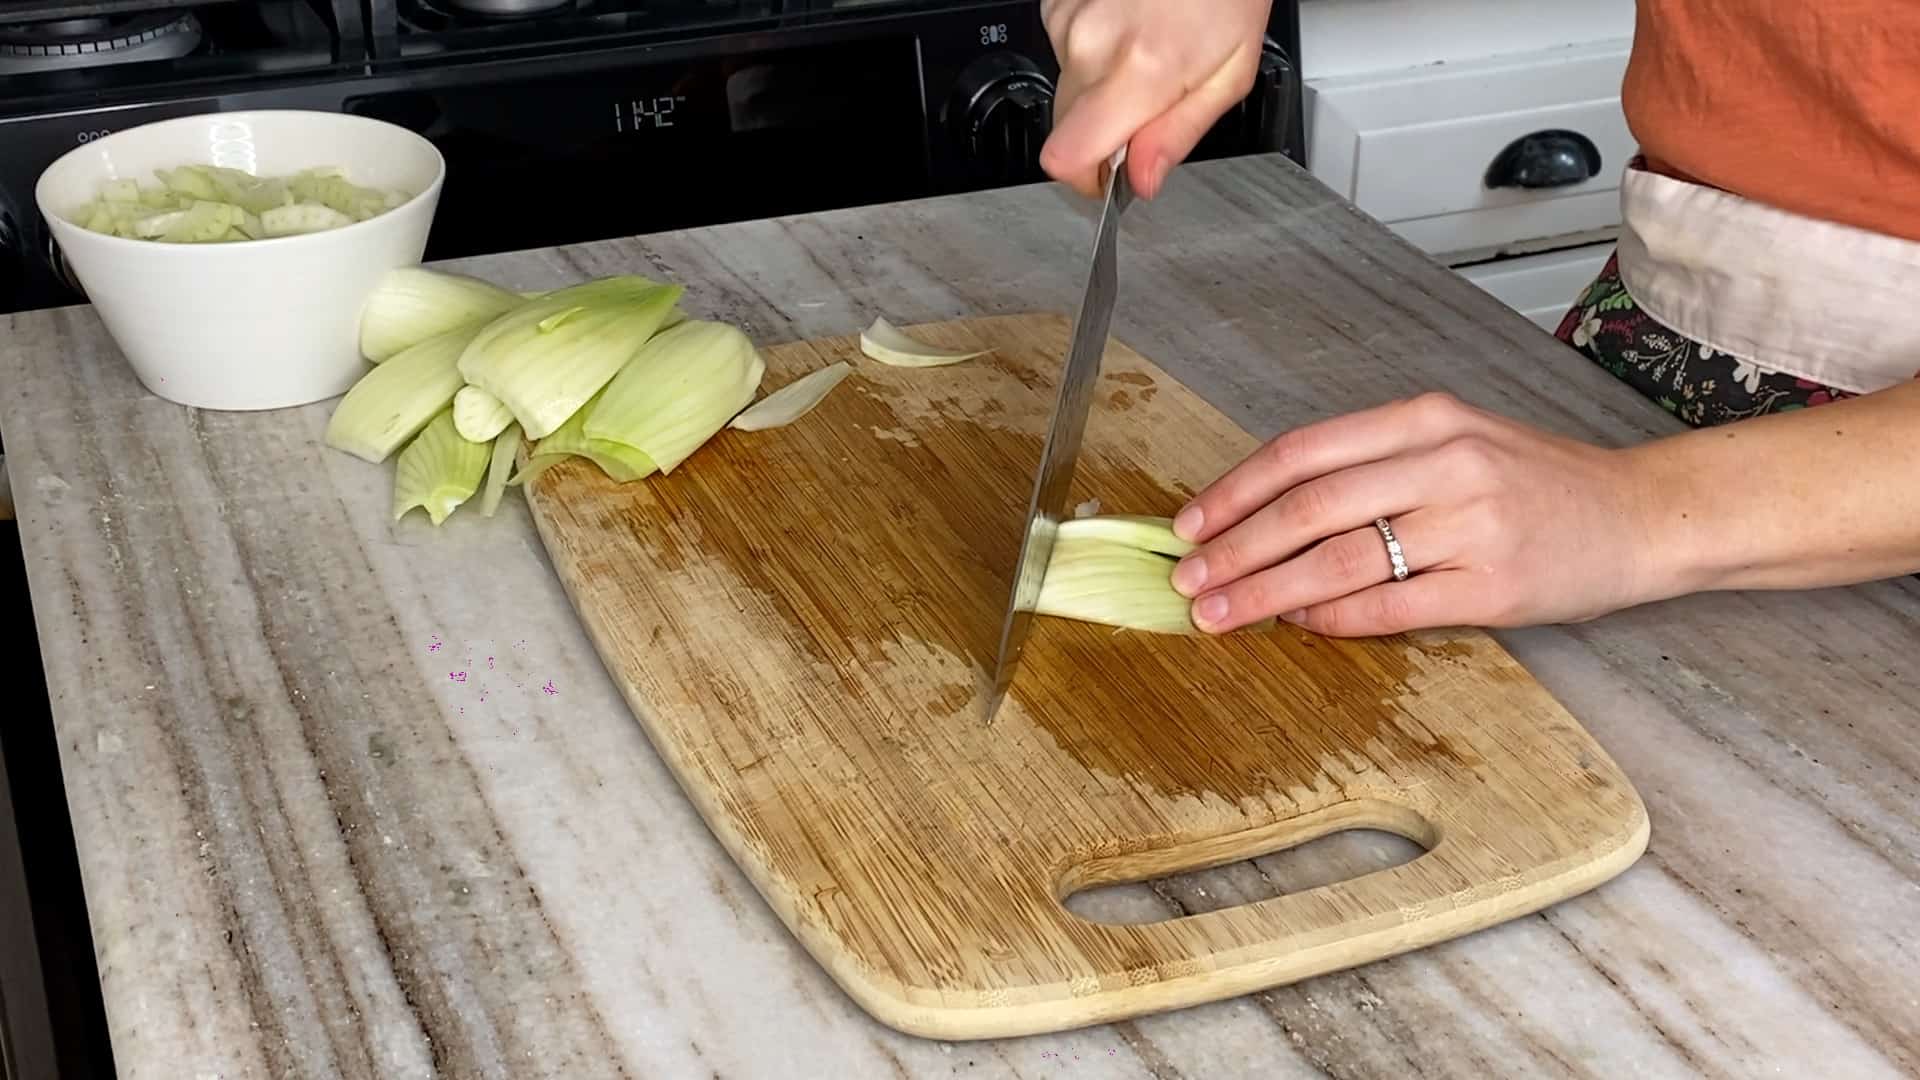 woman slicing a bulb of fennel with a chef's knife over a cutting board